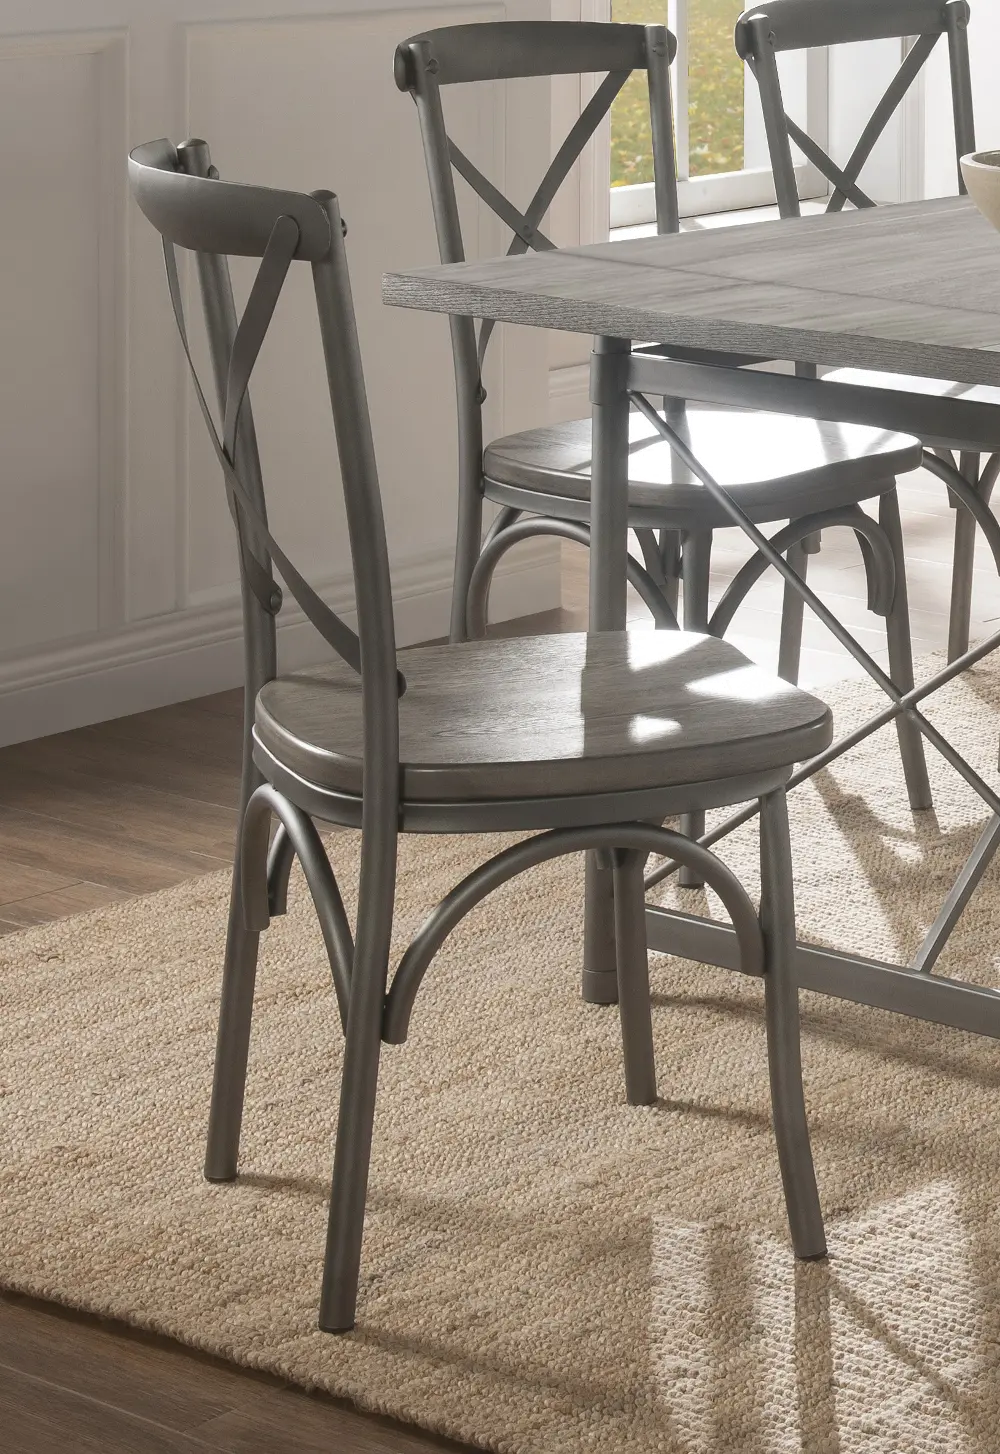 Industrial Weathered Wood and Metal Dining Chair - Gray-1